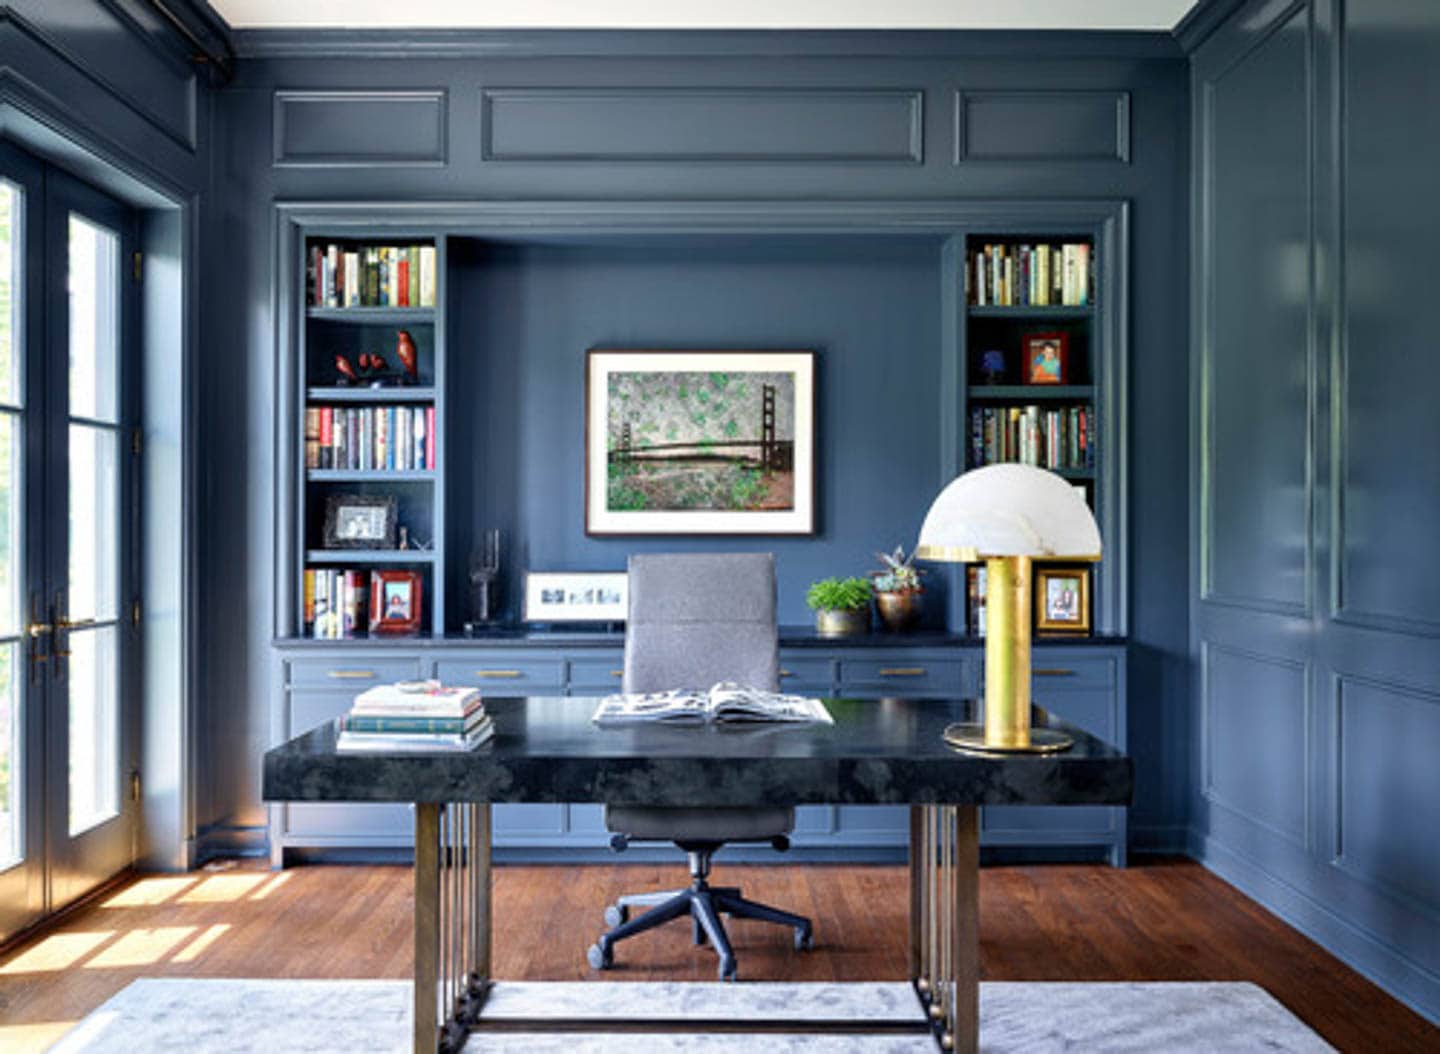 Home office with dark blue walls and shelves and a black desk